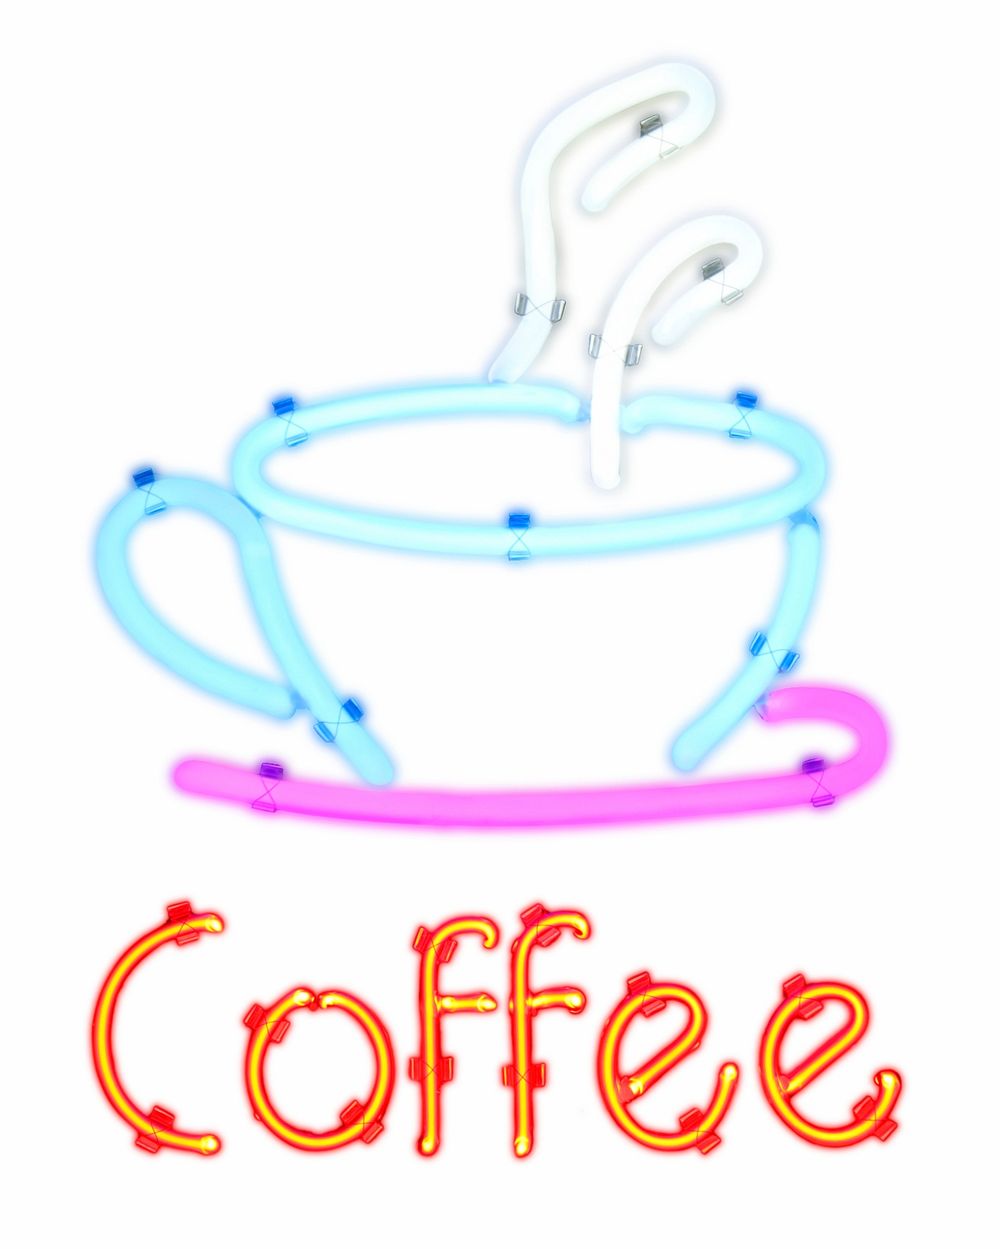 Coffee neon sign sticker, cafe image psd